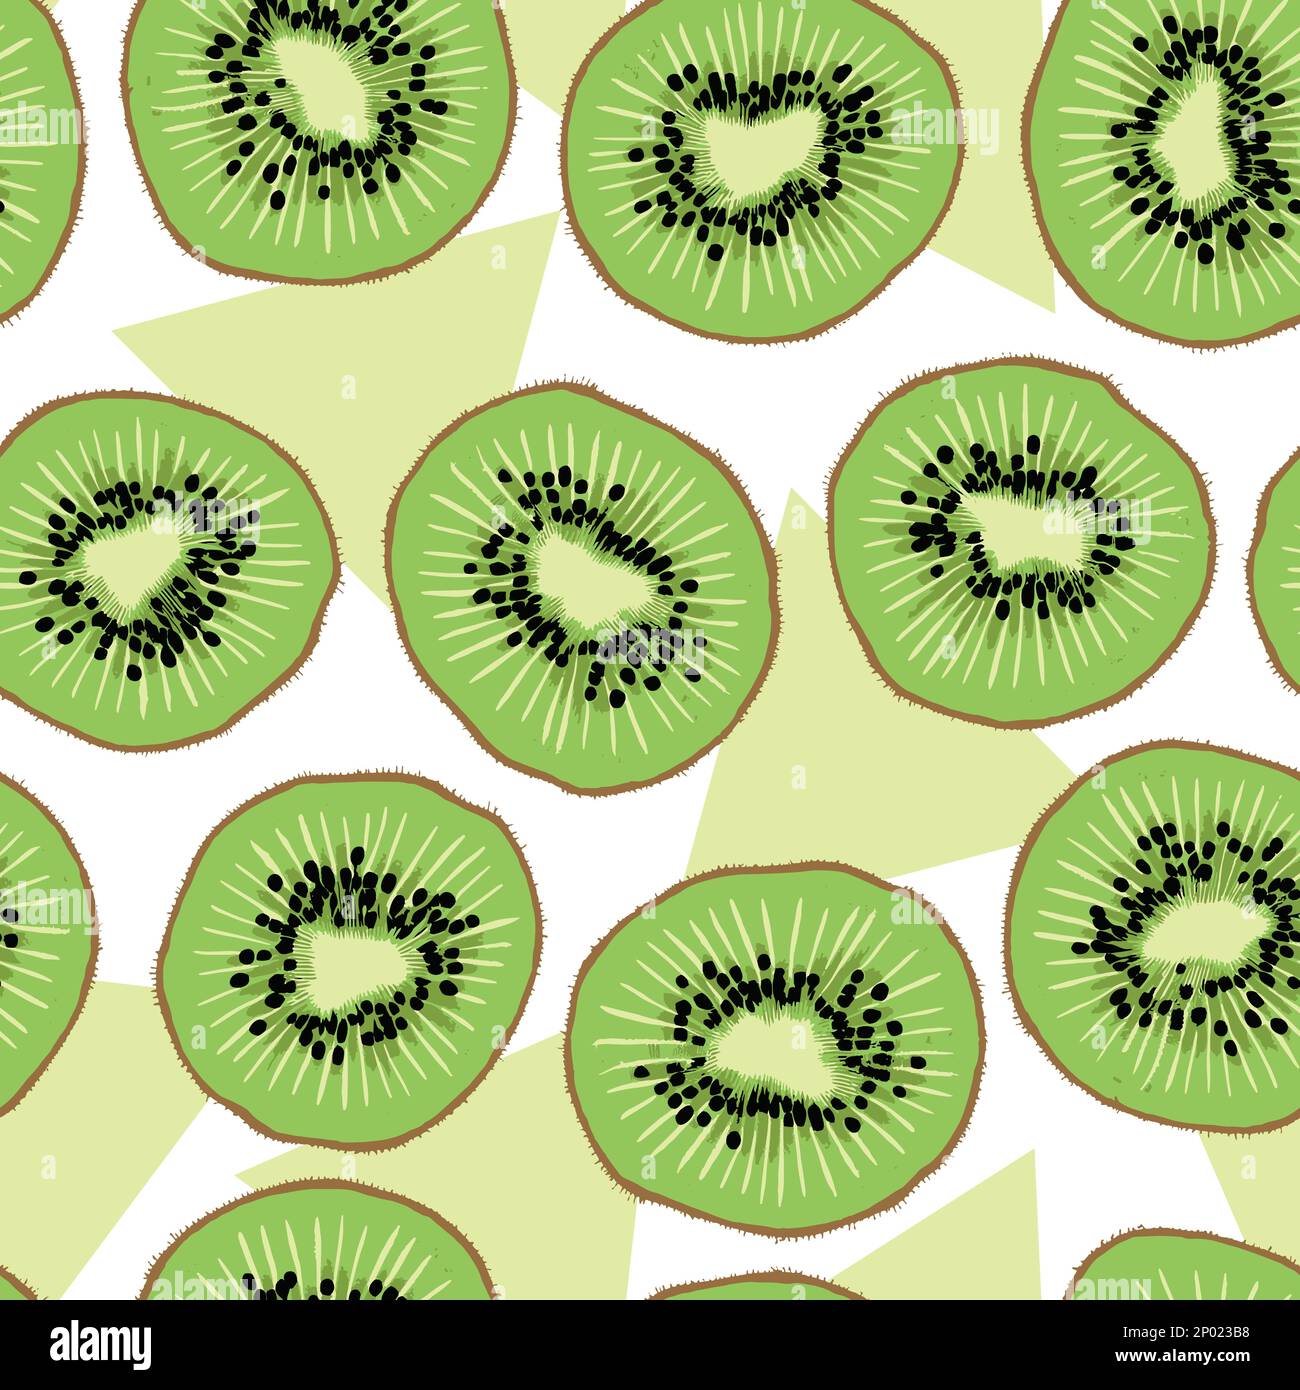 Vector Summer Fruit Kiwi Slice Seamless Pattern for Products or Wrapping Paper Prints. Stock Vector